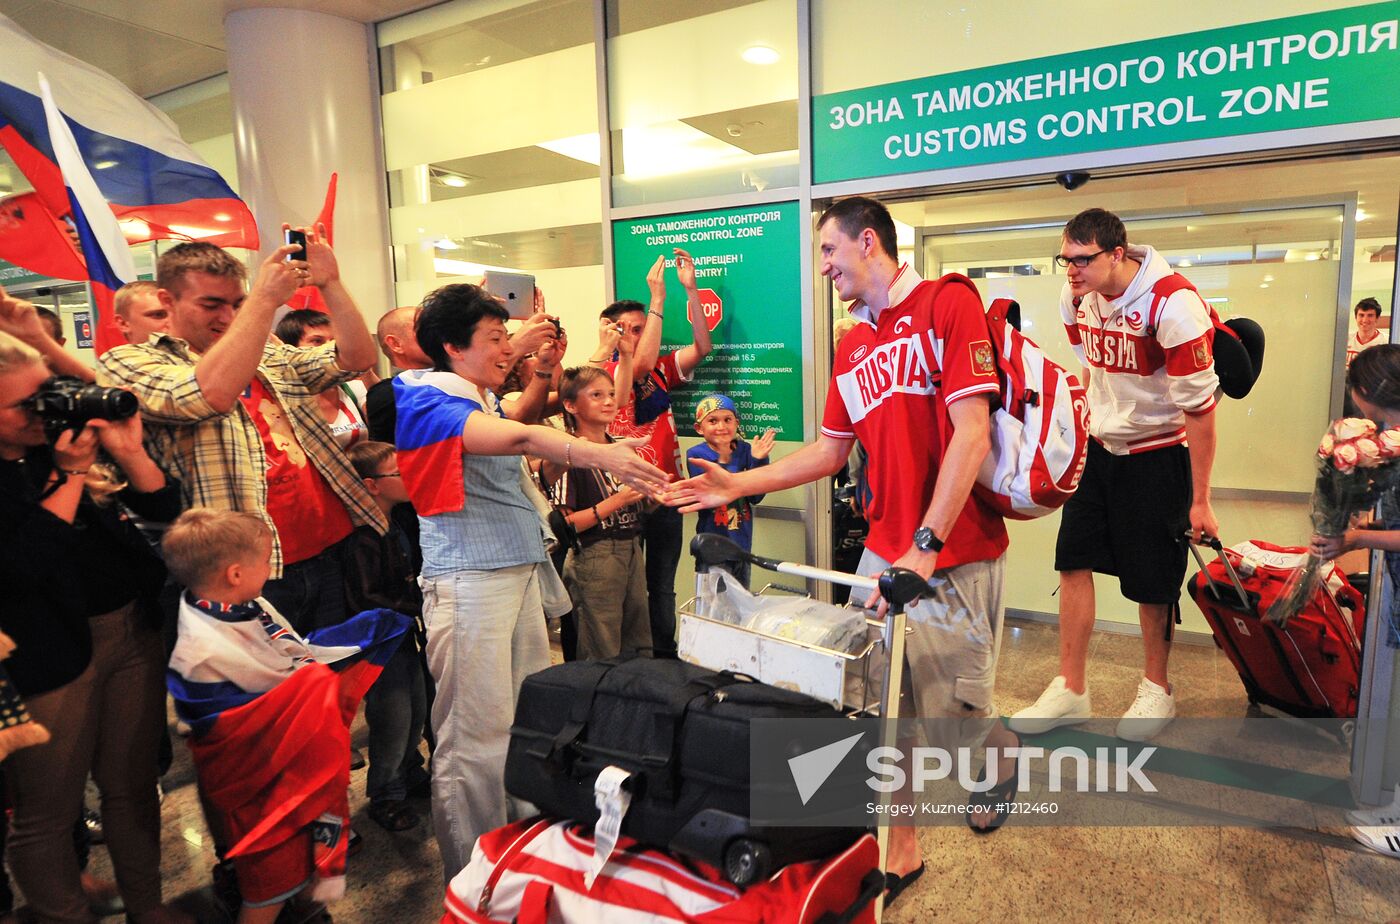 Russia's basketball team back in Moscow after the Olympics